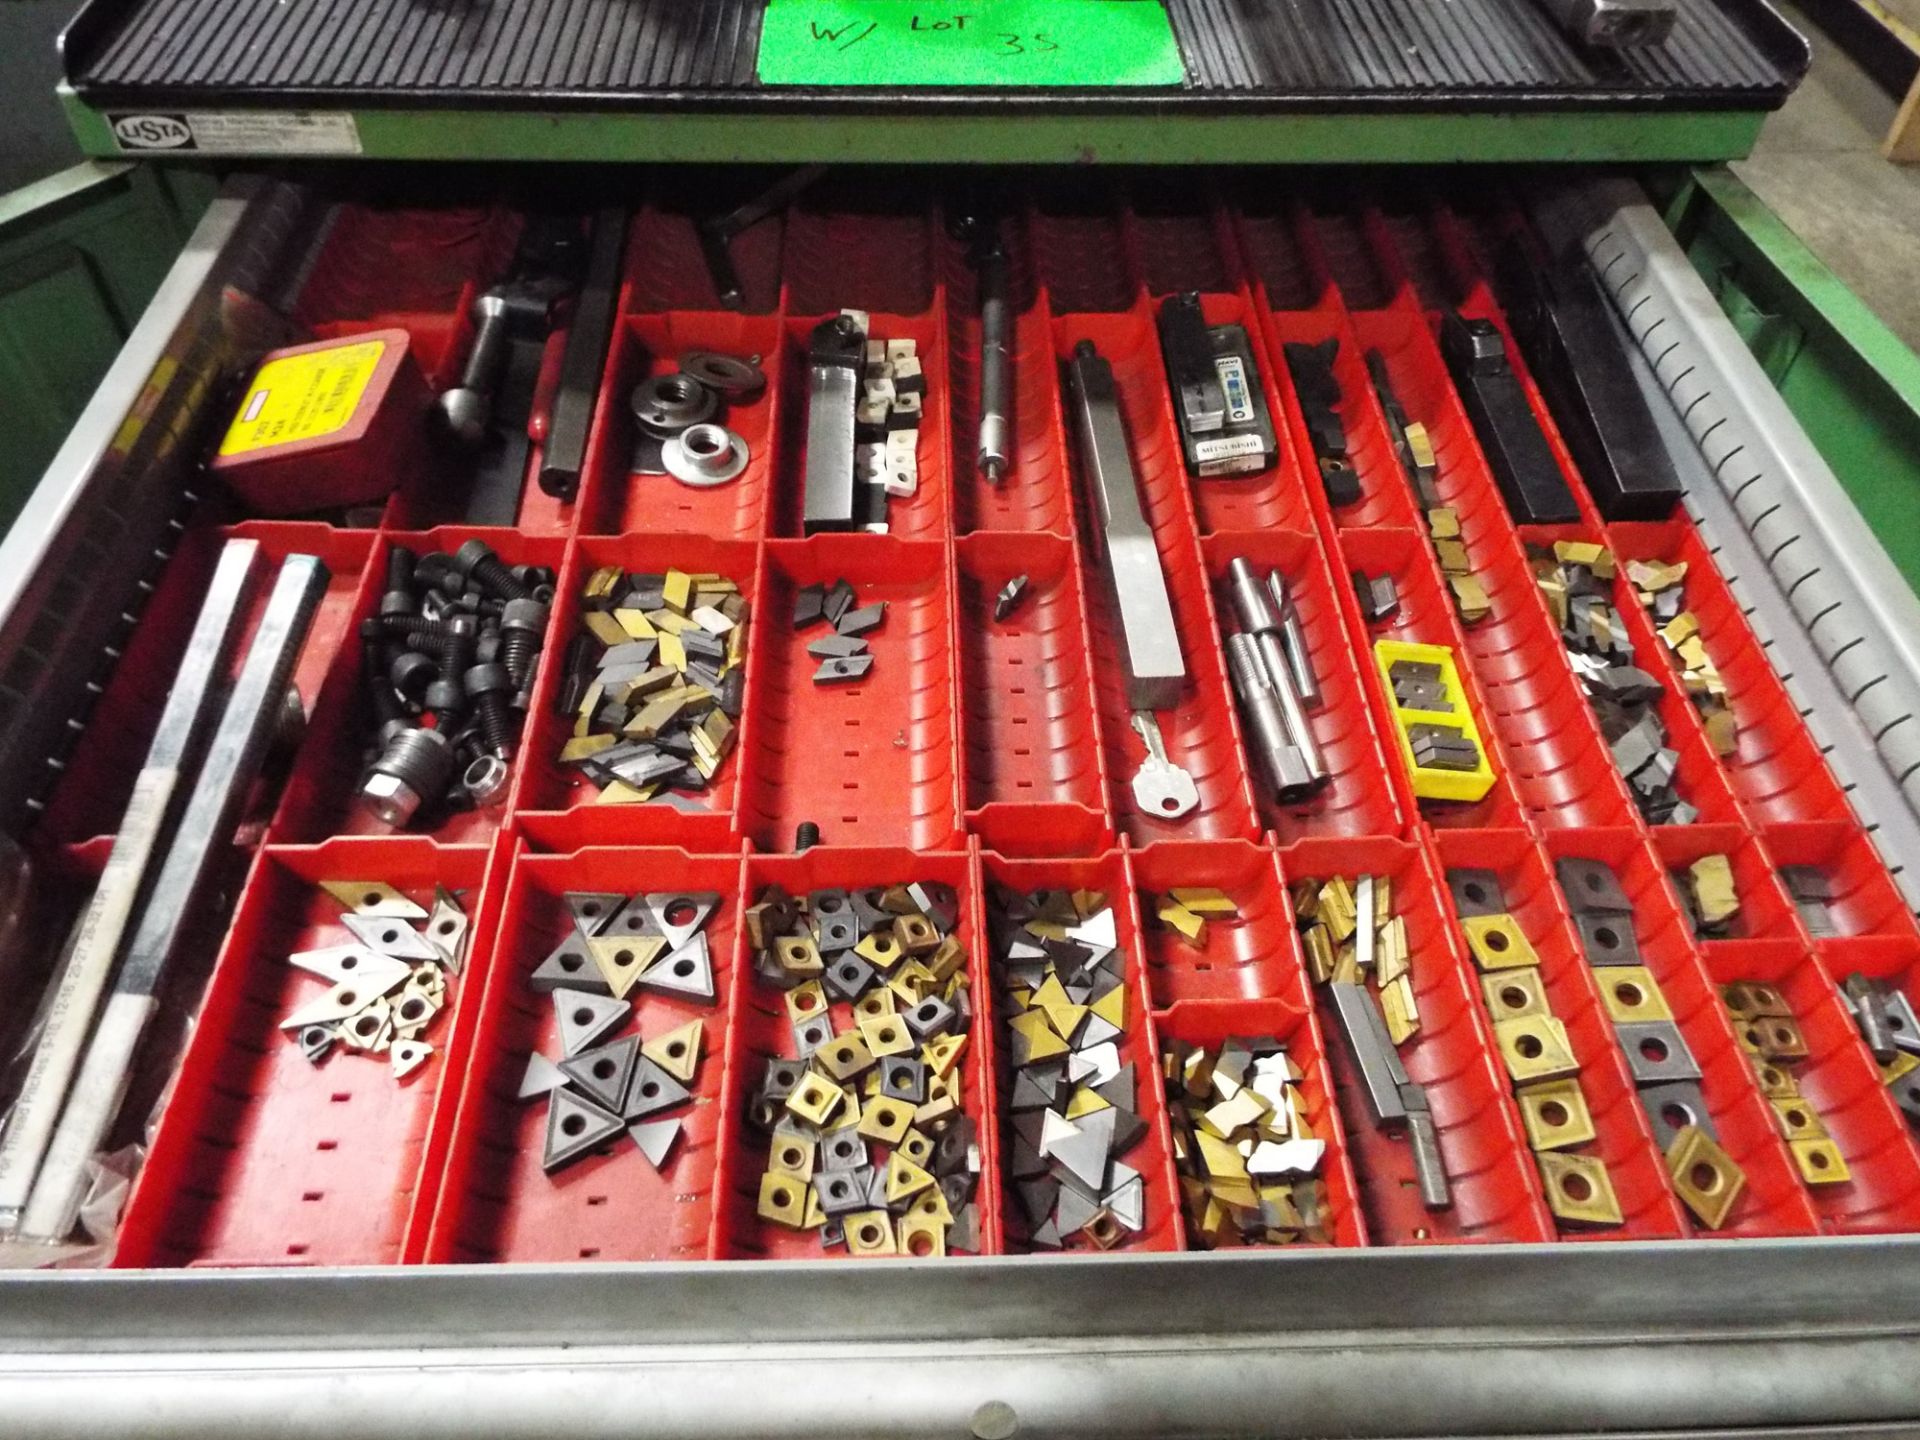 LOT/ HWACHEON TOOLING INCLUDING BORING BARS, CARBIDE INSERTS, CENTERS, DRILL CHUCKS, AND CHUCK JAWS - Image 3 of 6